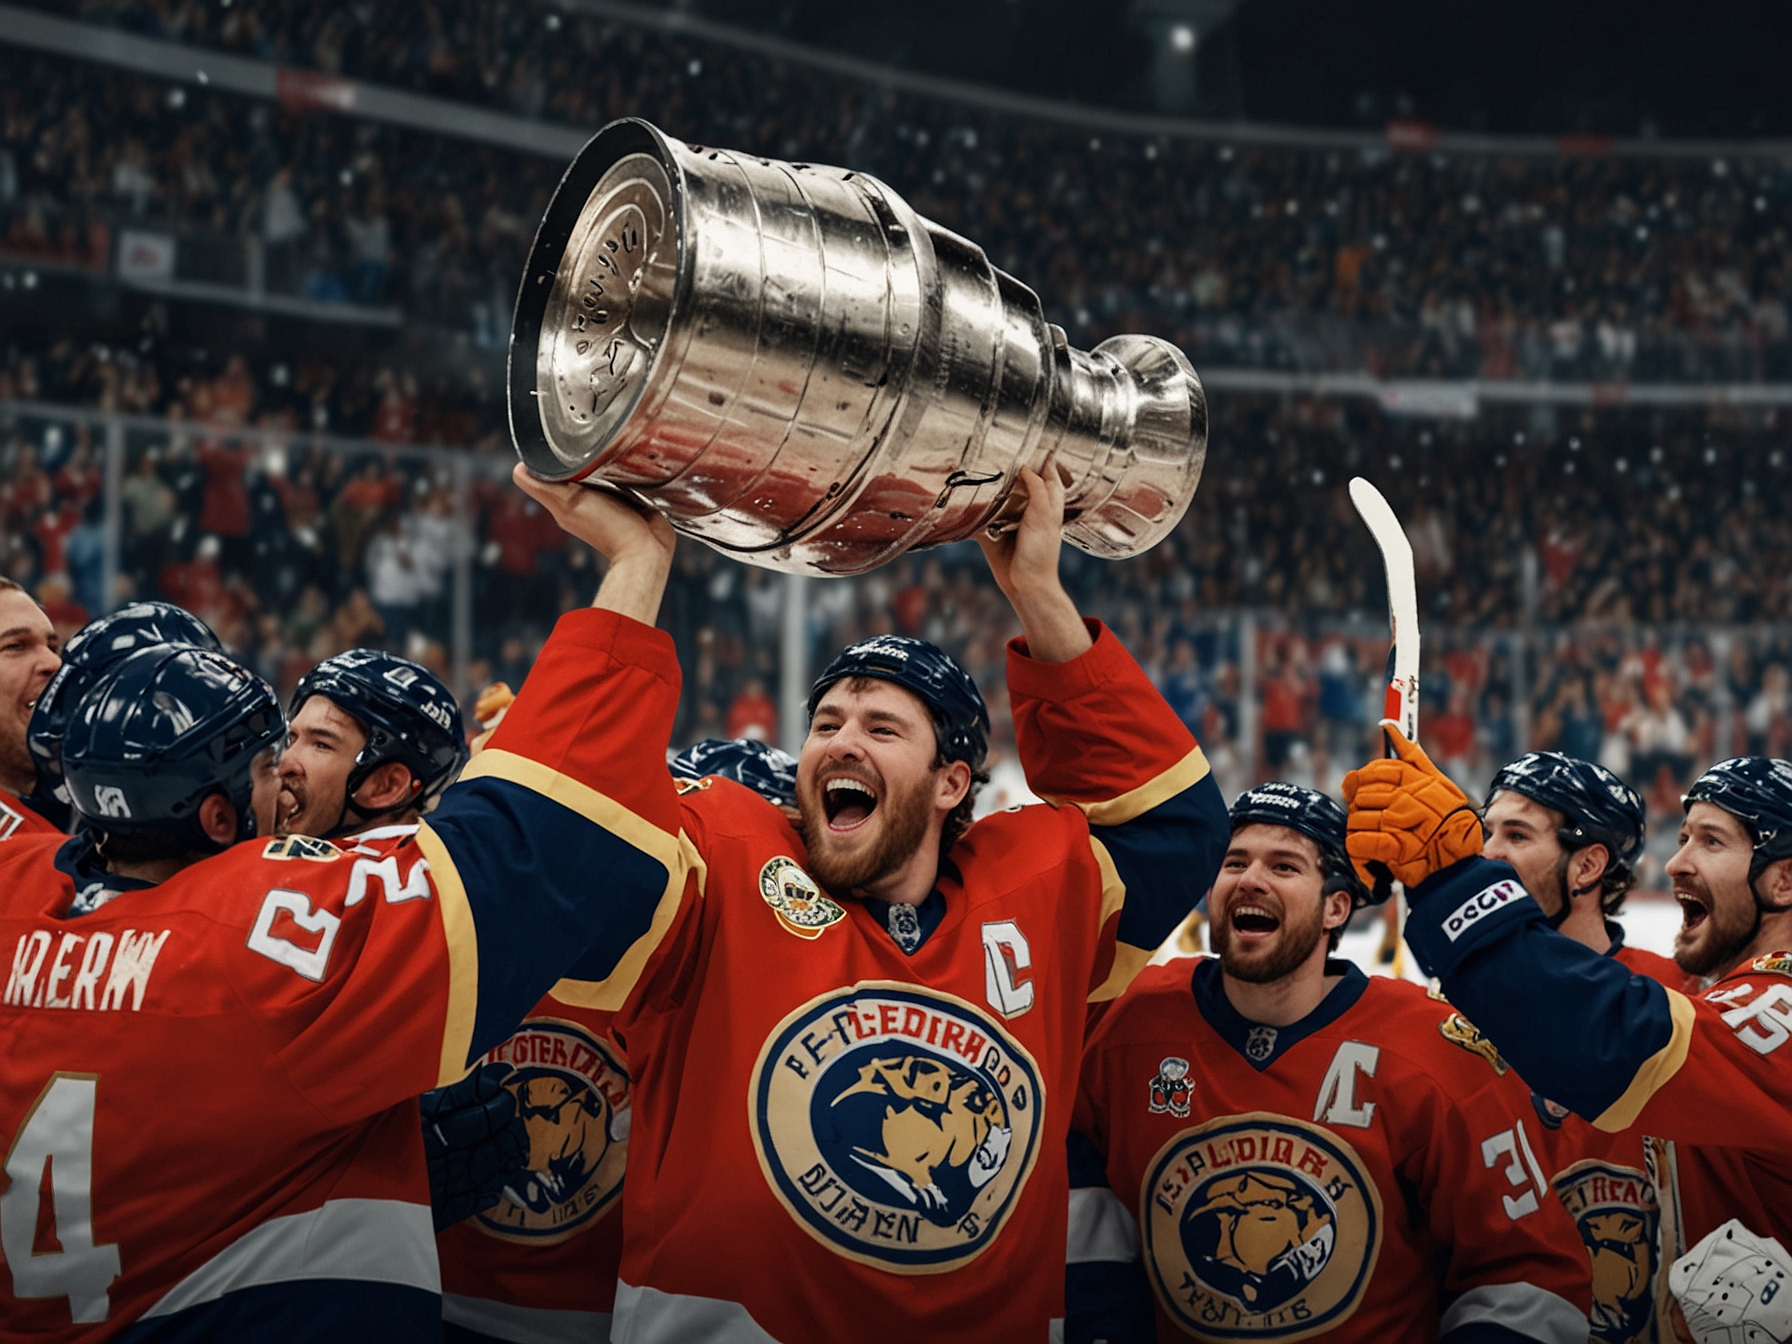 The Florida Panthers celebrate with the Stanley Cup on the ice after their historic victory over the Edmonton Oilers. The scene is filled with jubilation, team pride, and emotional triumph.